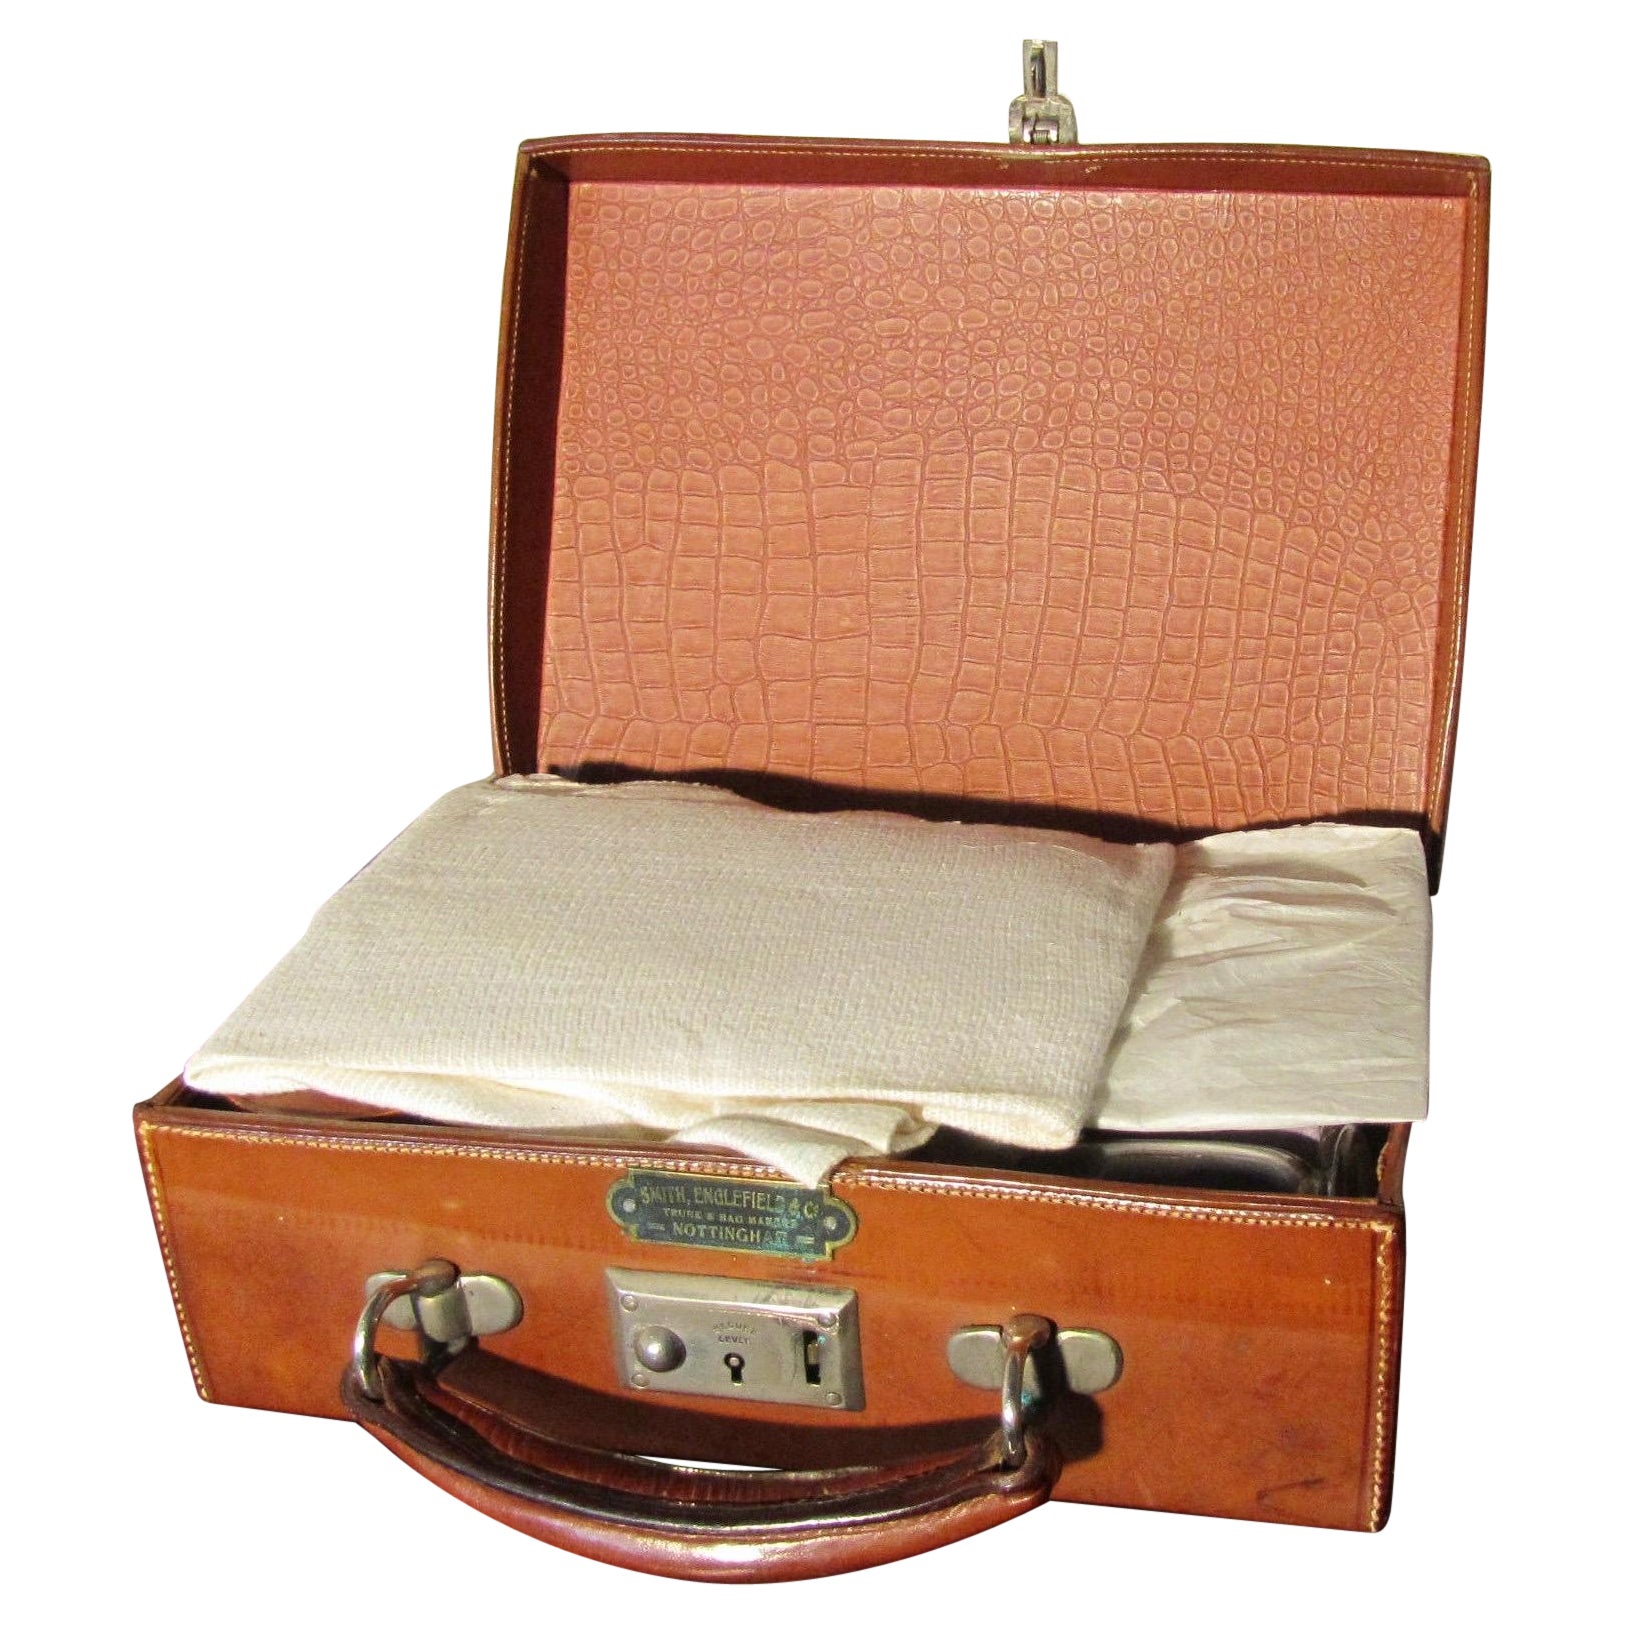 WWw11, Tiny Leather Attaché Case First Aid Medical Equipment